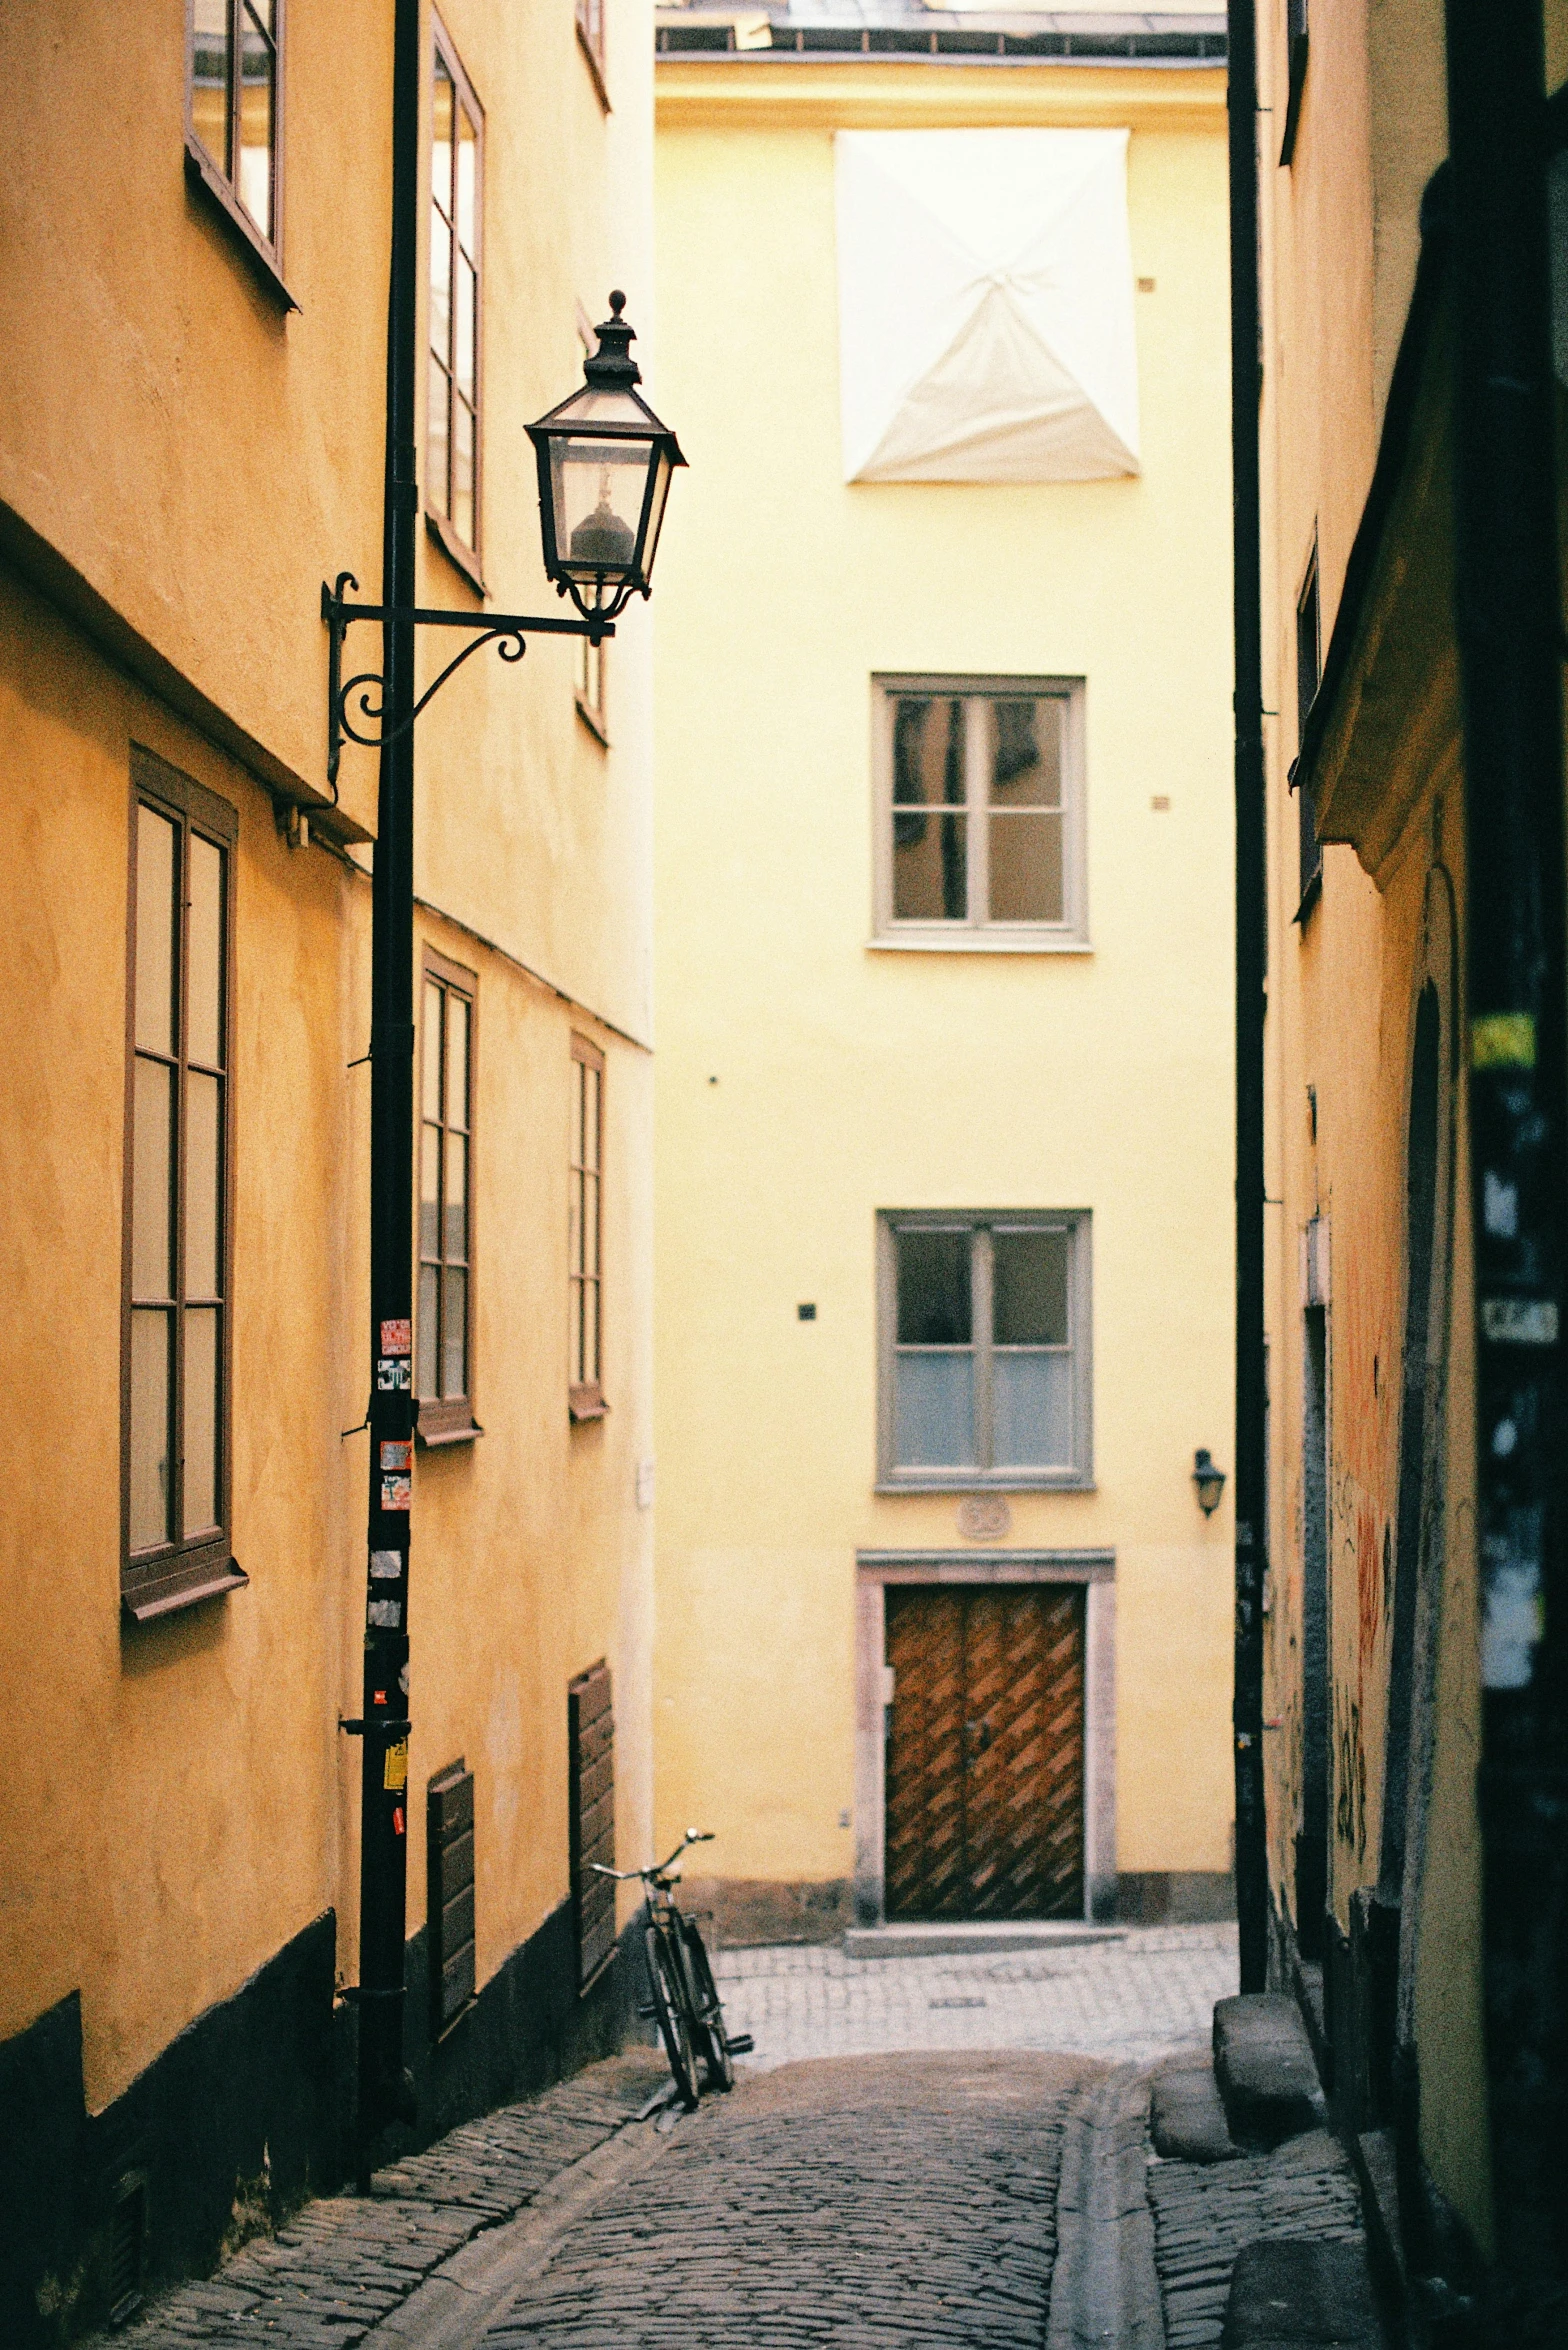 a bicycle is parked on a cobblestone street, inspired by Carl Gustaf Pilo, pale yellow walls, golden windows, street lanterns, colour photograph